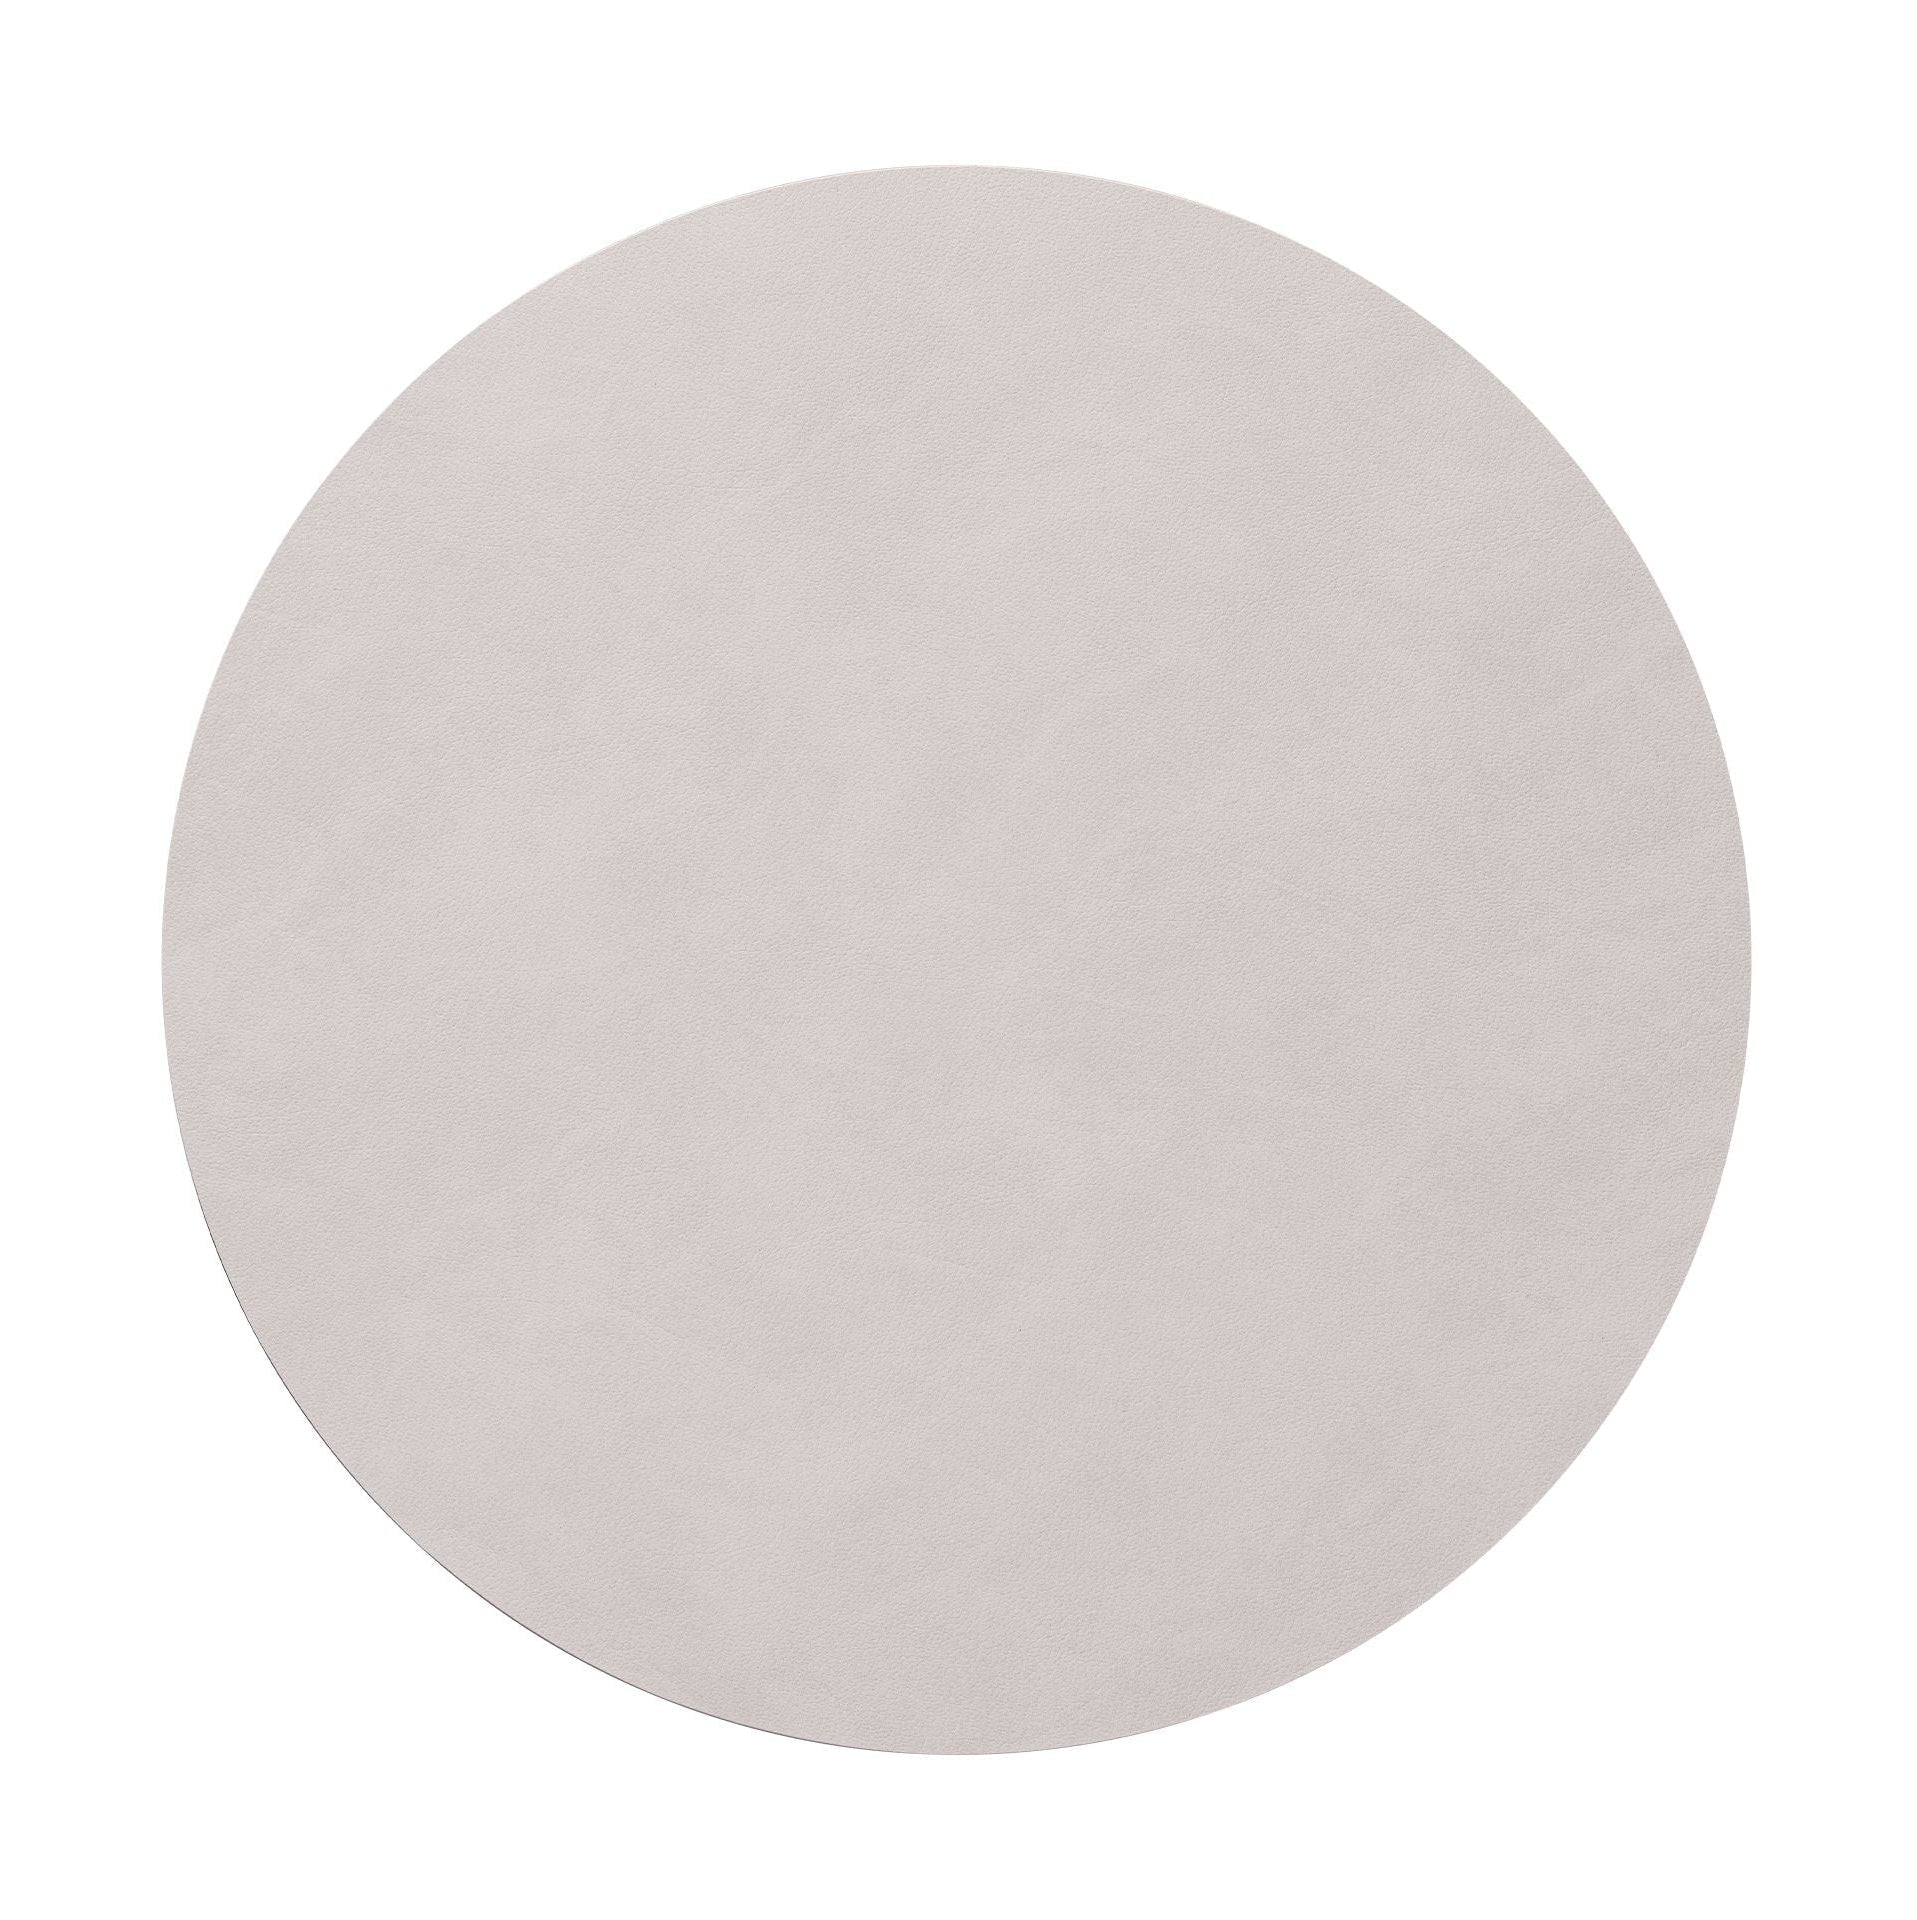 Lind Dna Table Mat Cercle XL, Oyster White